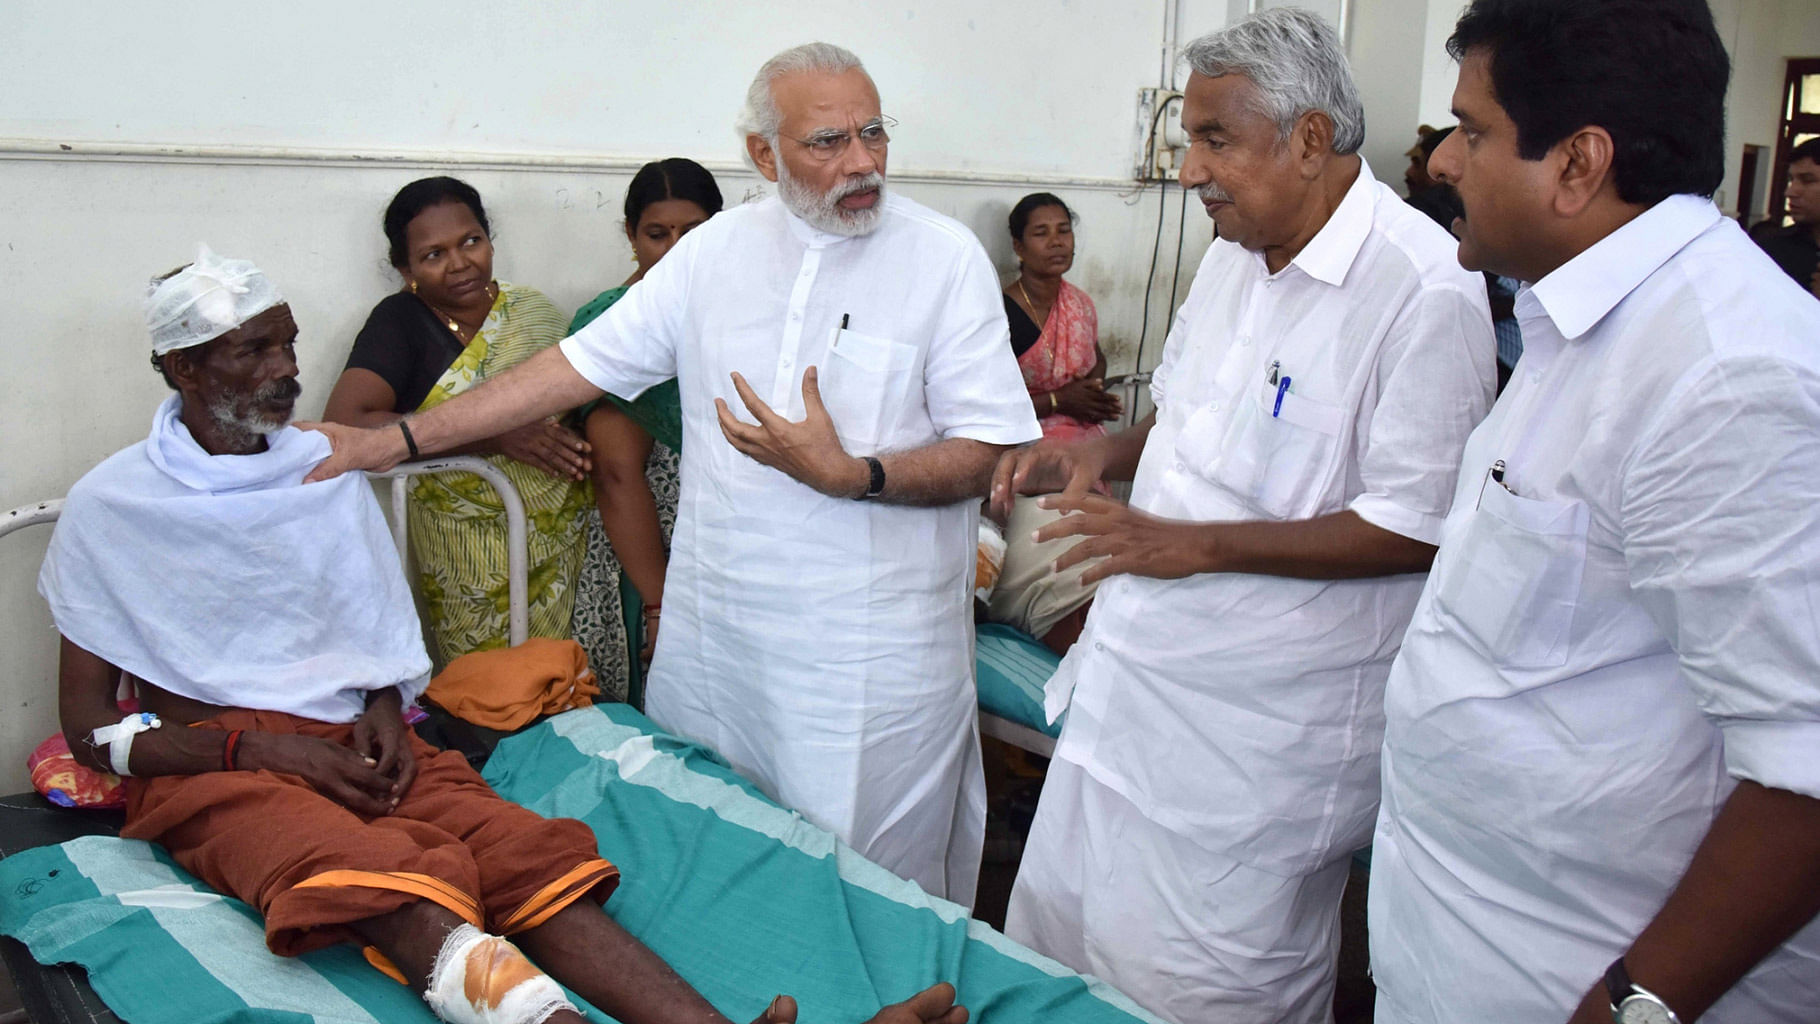  Prime Minister Narendra Modi visits Kollam District Hospital to meet the victims of Paravur Puttingal temple accident, in Kerala on 10 April 2016. (Photo: IANS)